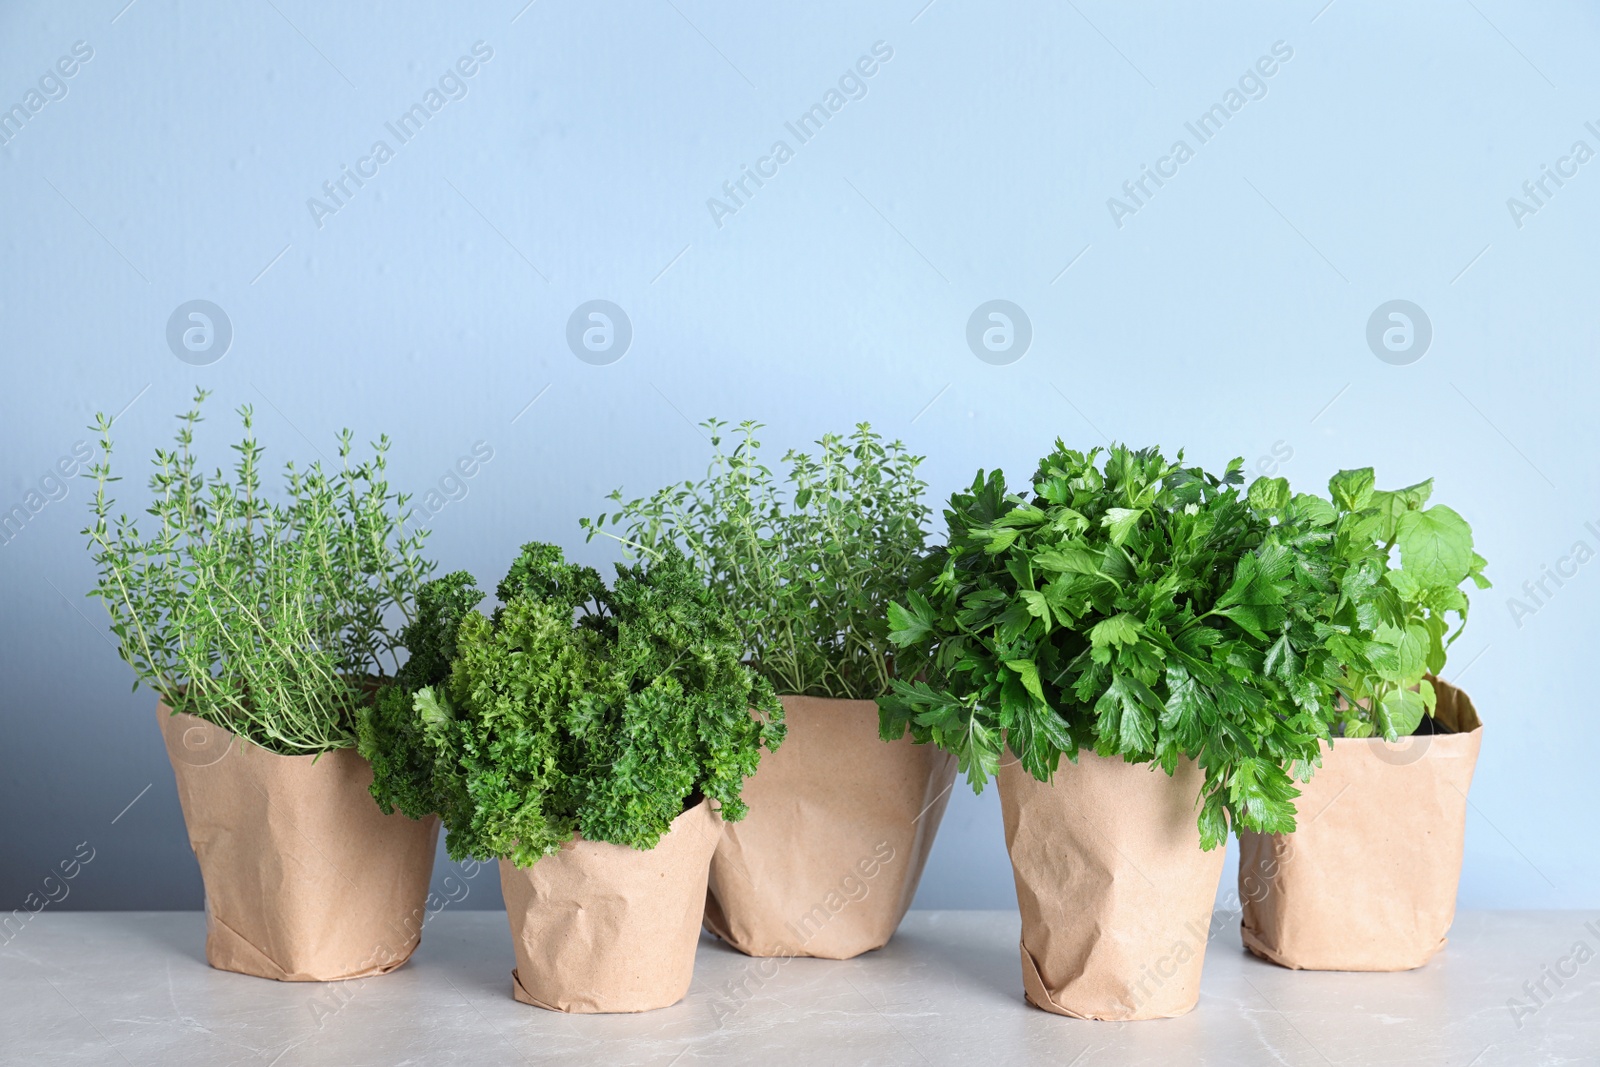 Photo of Seedlings of different aromatic herbs in paper wrapped pots on light grey marble table